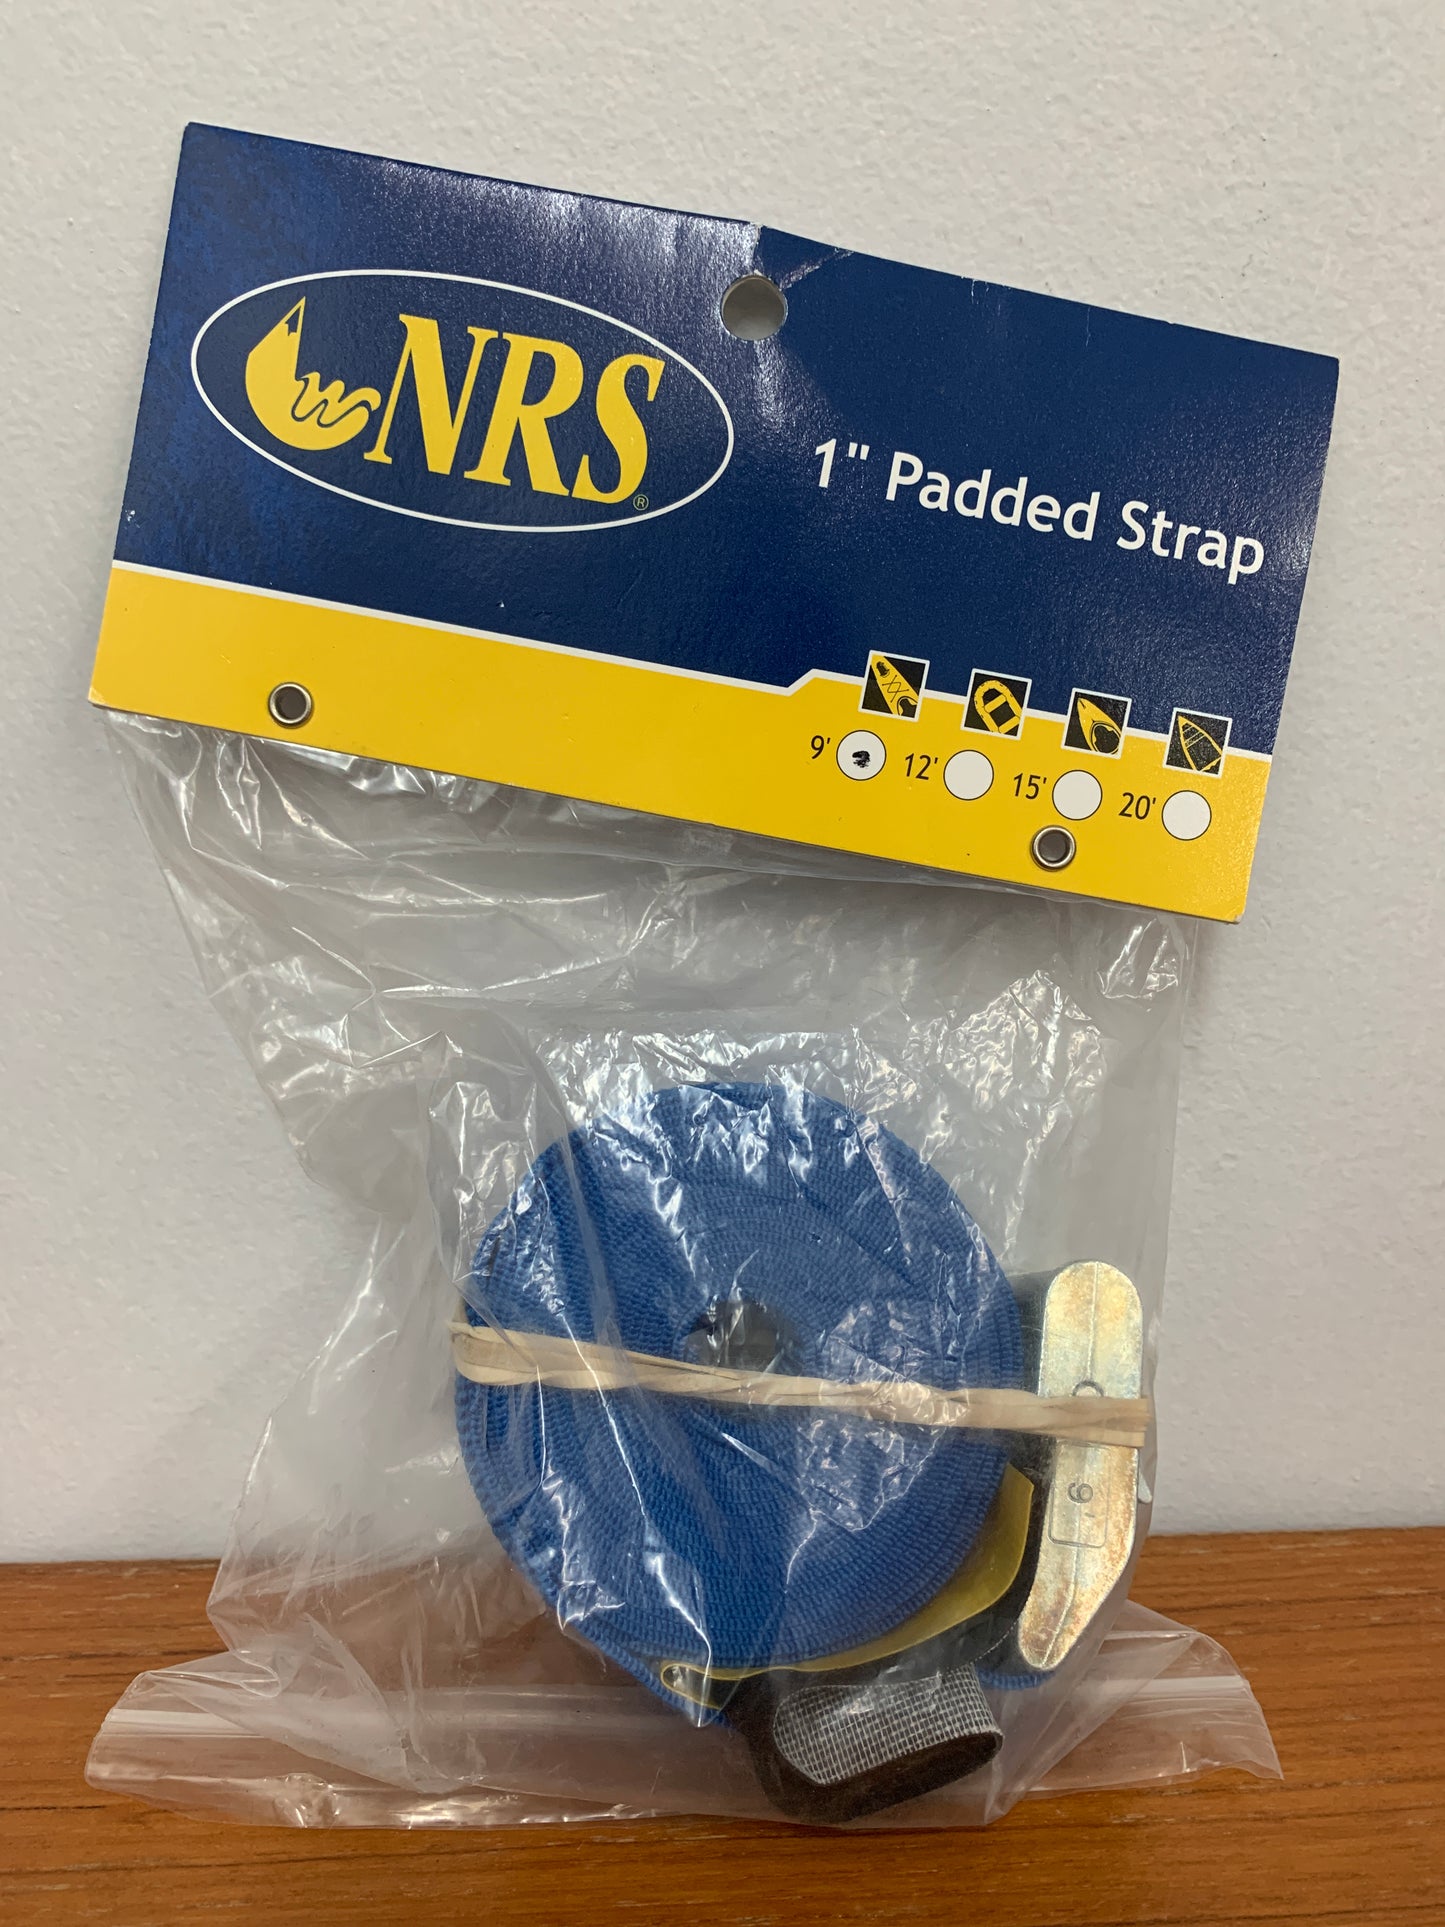 NRS + Outdoors Inc Logo 1" Tie-Down Strap